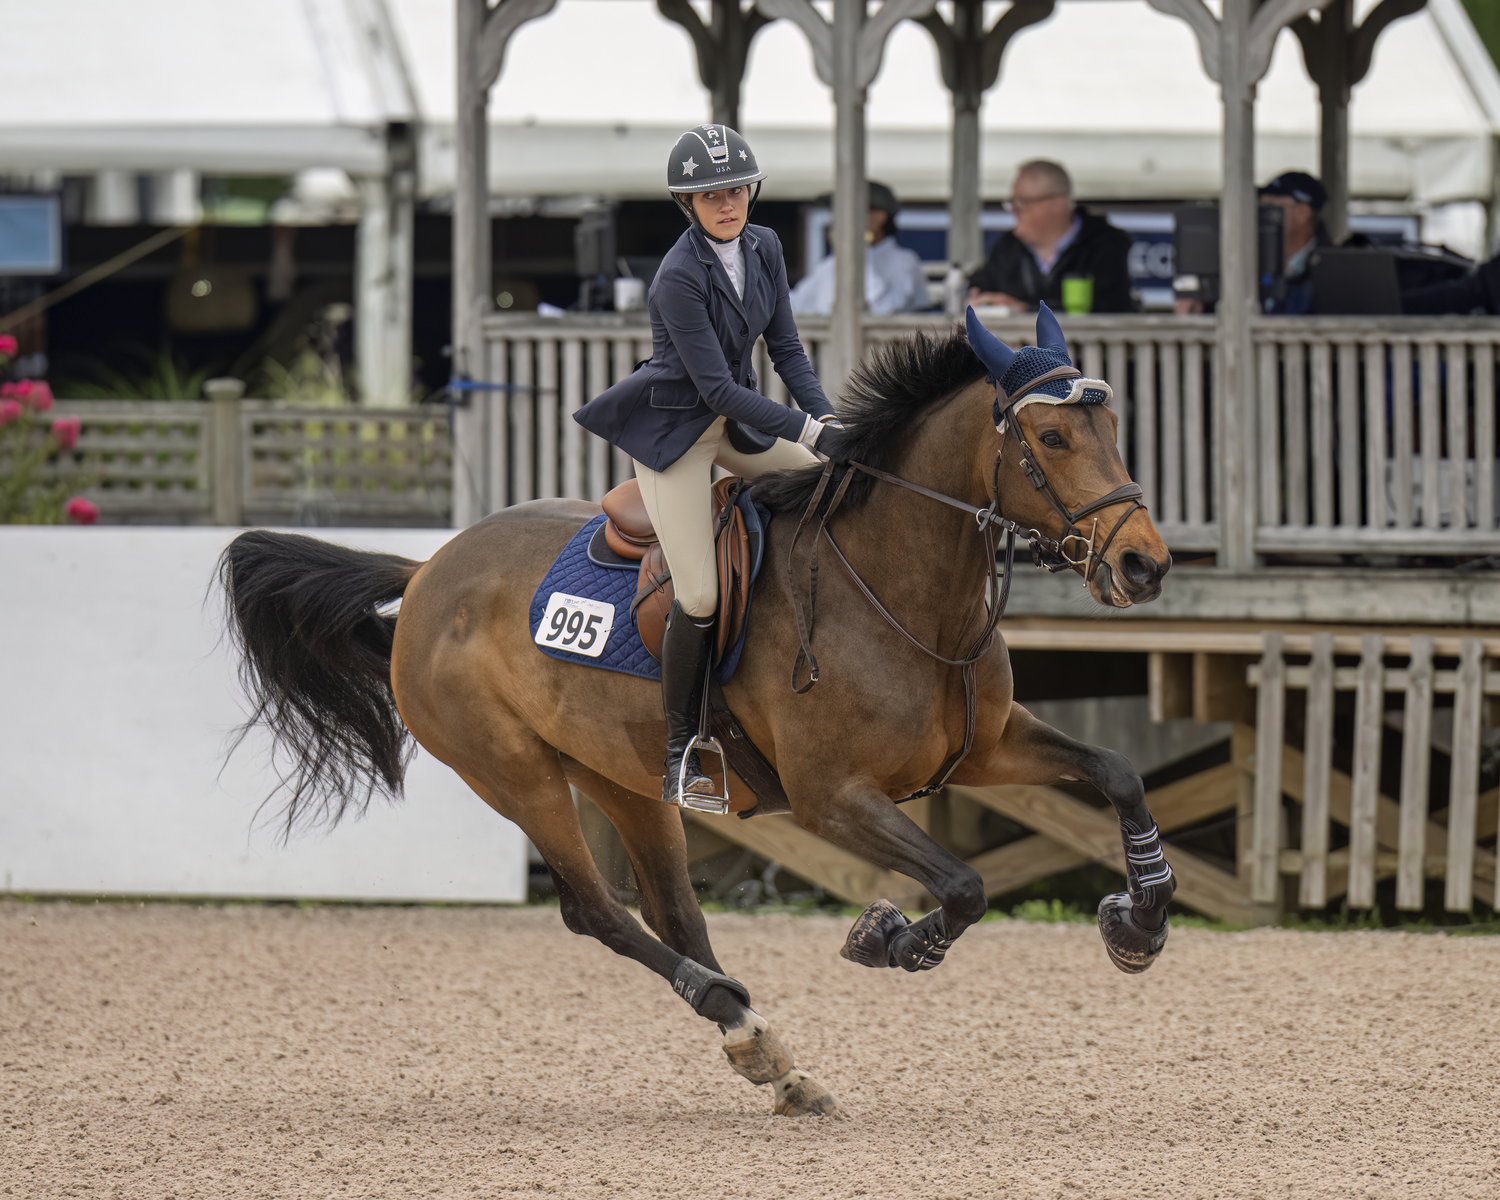 Amelia Burnside, an 8th grader at Pierson Middle-High School in Sag Harbor wins the Junior Jumper 1.2 meter on Tuesday morning on Coco Chanel.   MARIANNE BARNETT